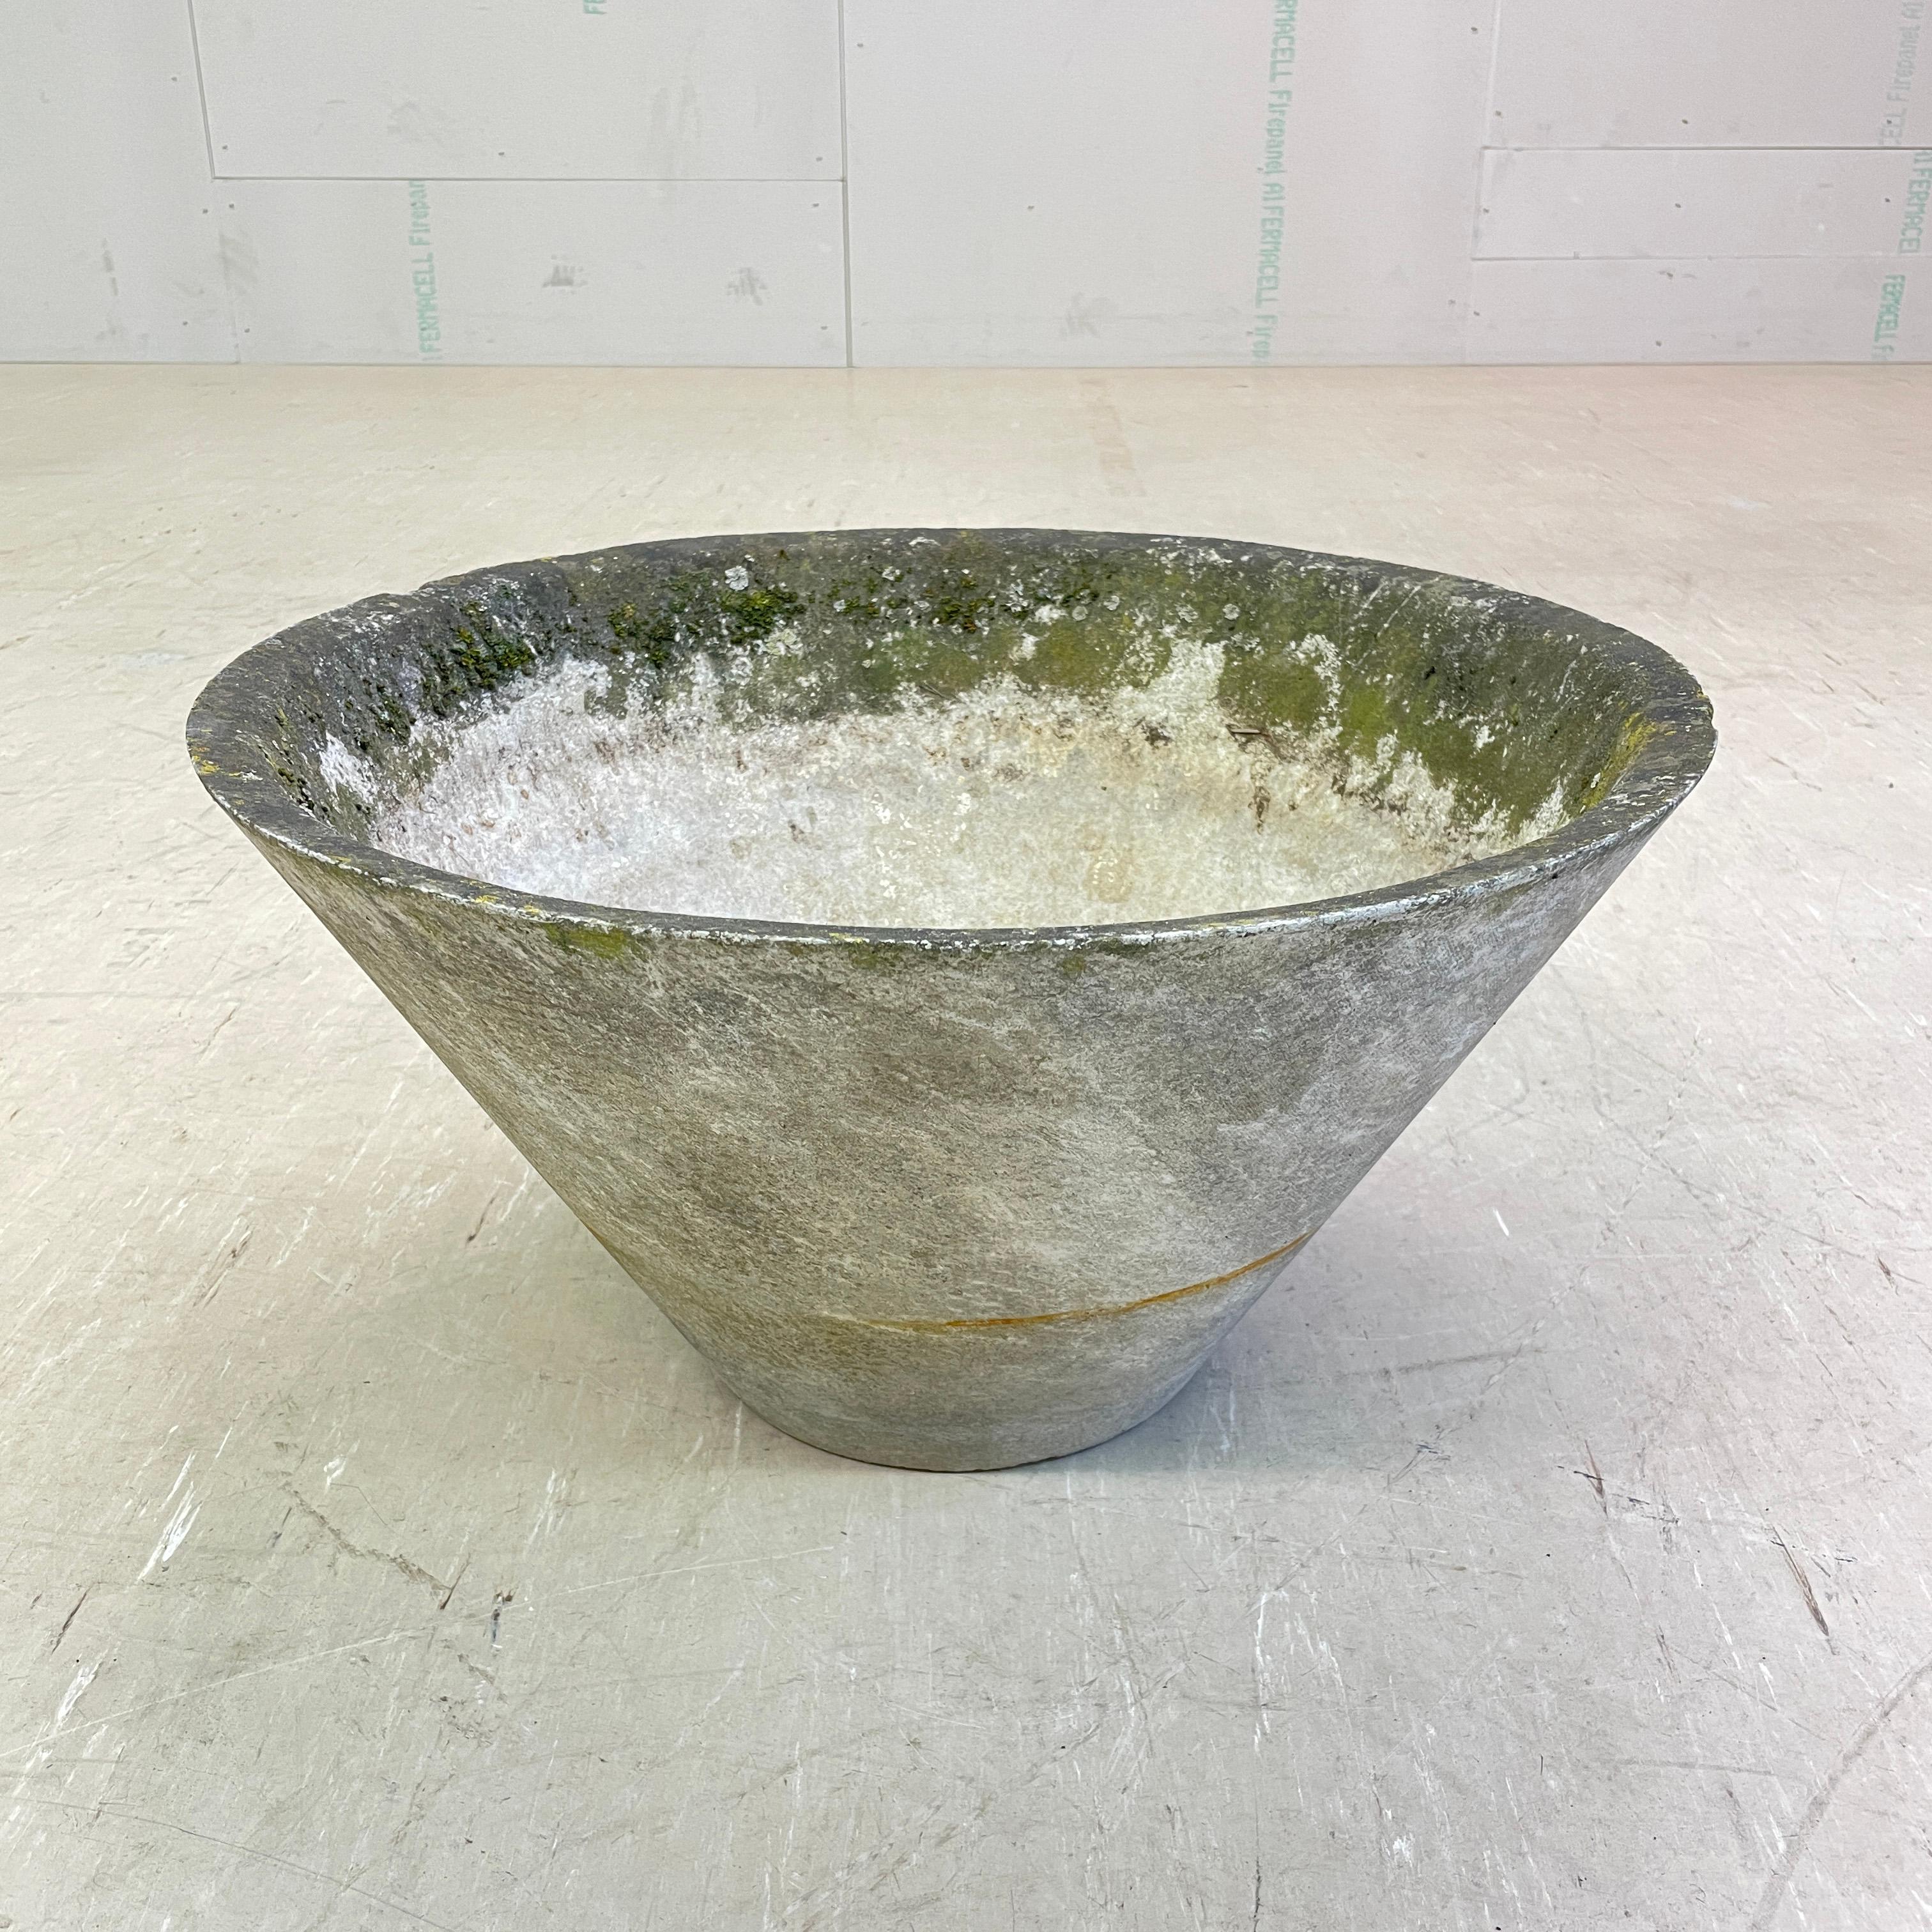 Conical concrete flower pot by Swiss architect and designer, Willy Guhl. Solid concrete made in Switzerland 1960 - 1970. Produced by Eternit AG, Switzerland. Tapered structure with drainage holes. In original condition with beautiful patination